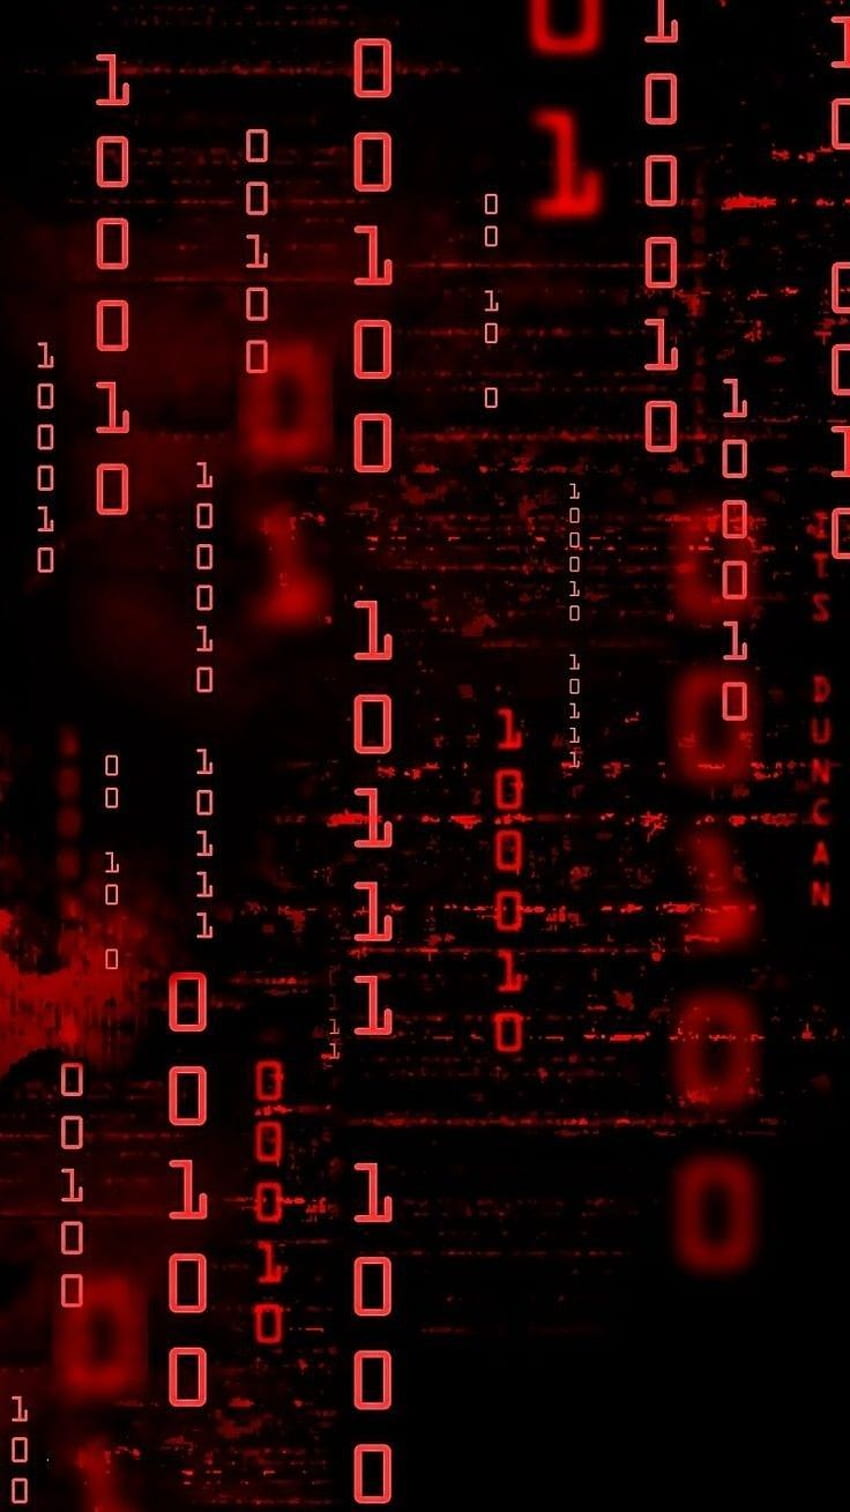 Red binary code wallpaper for your phone - Dark red